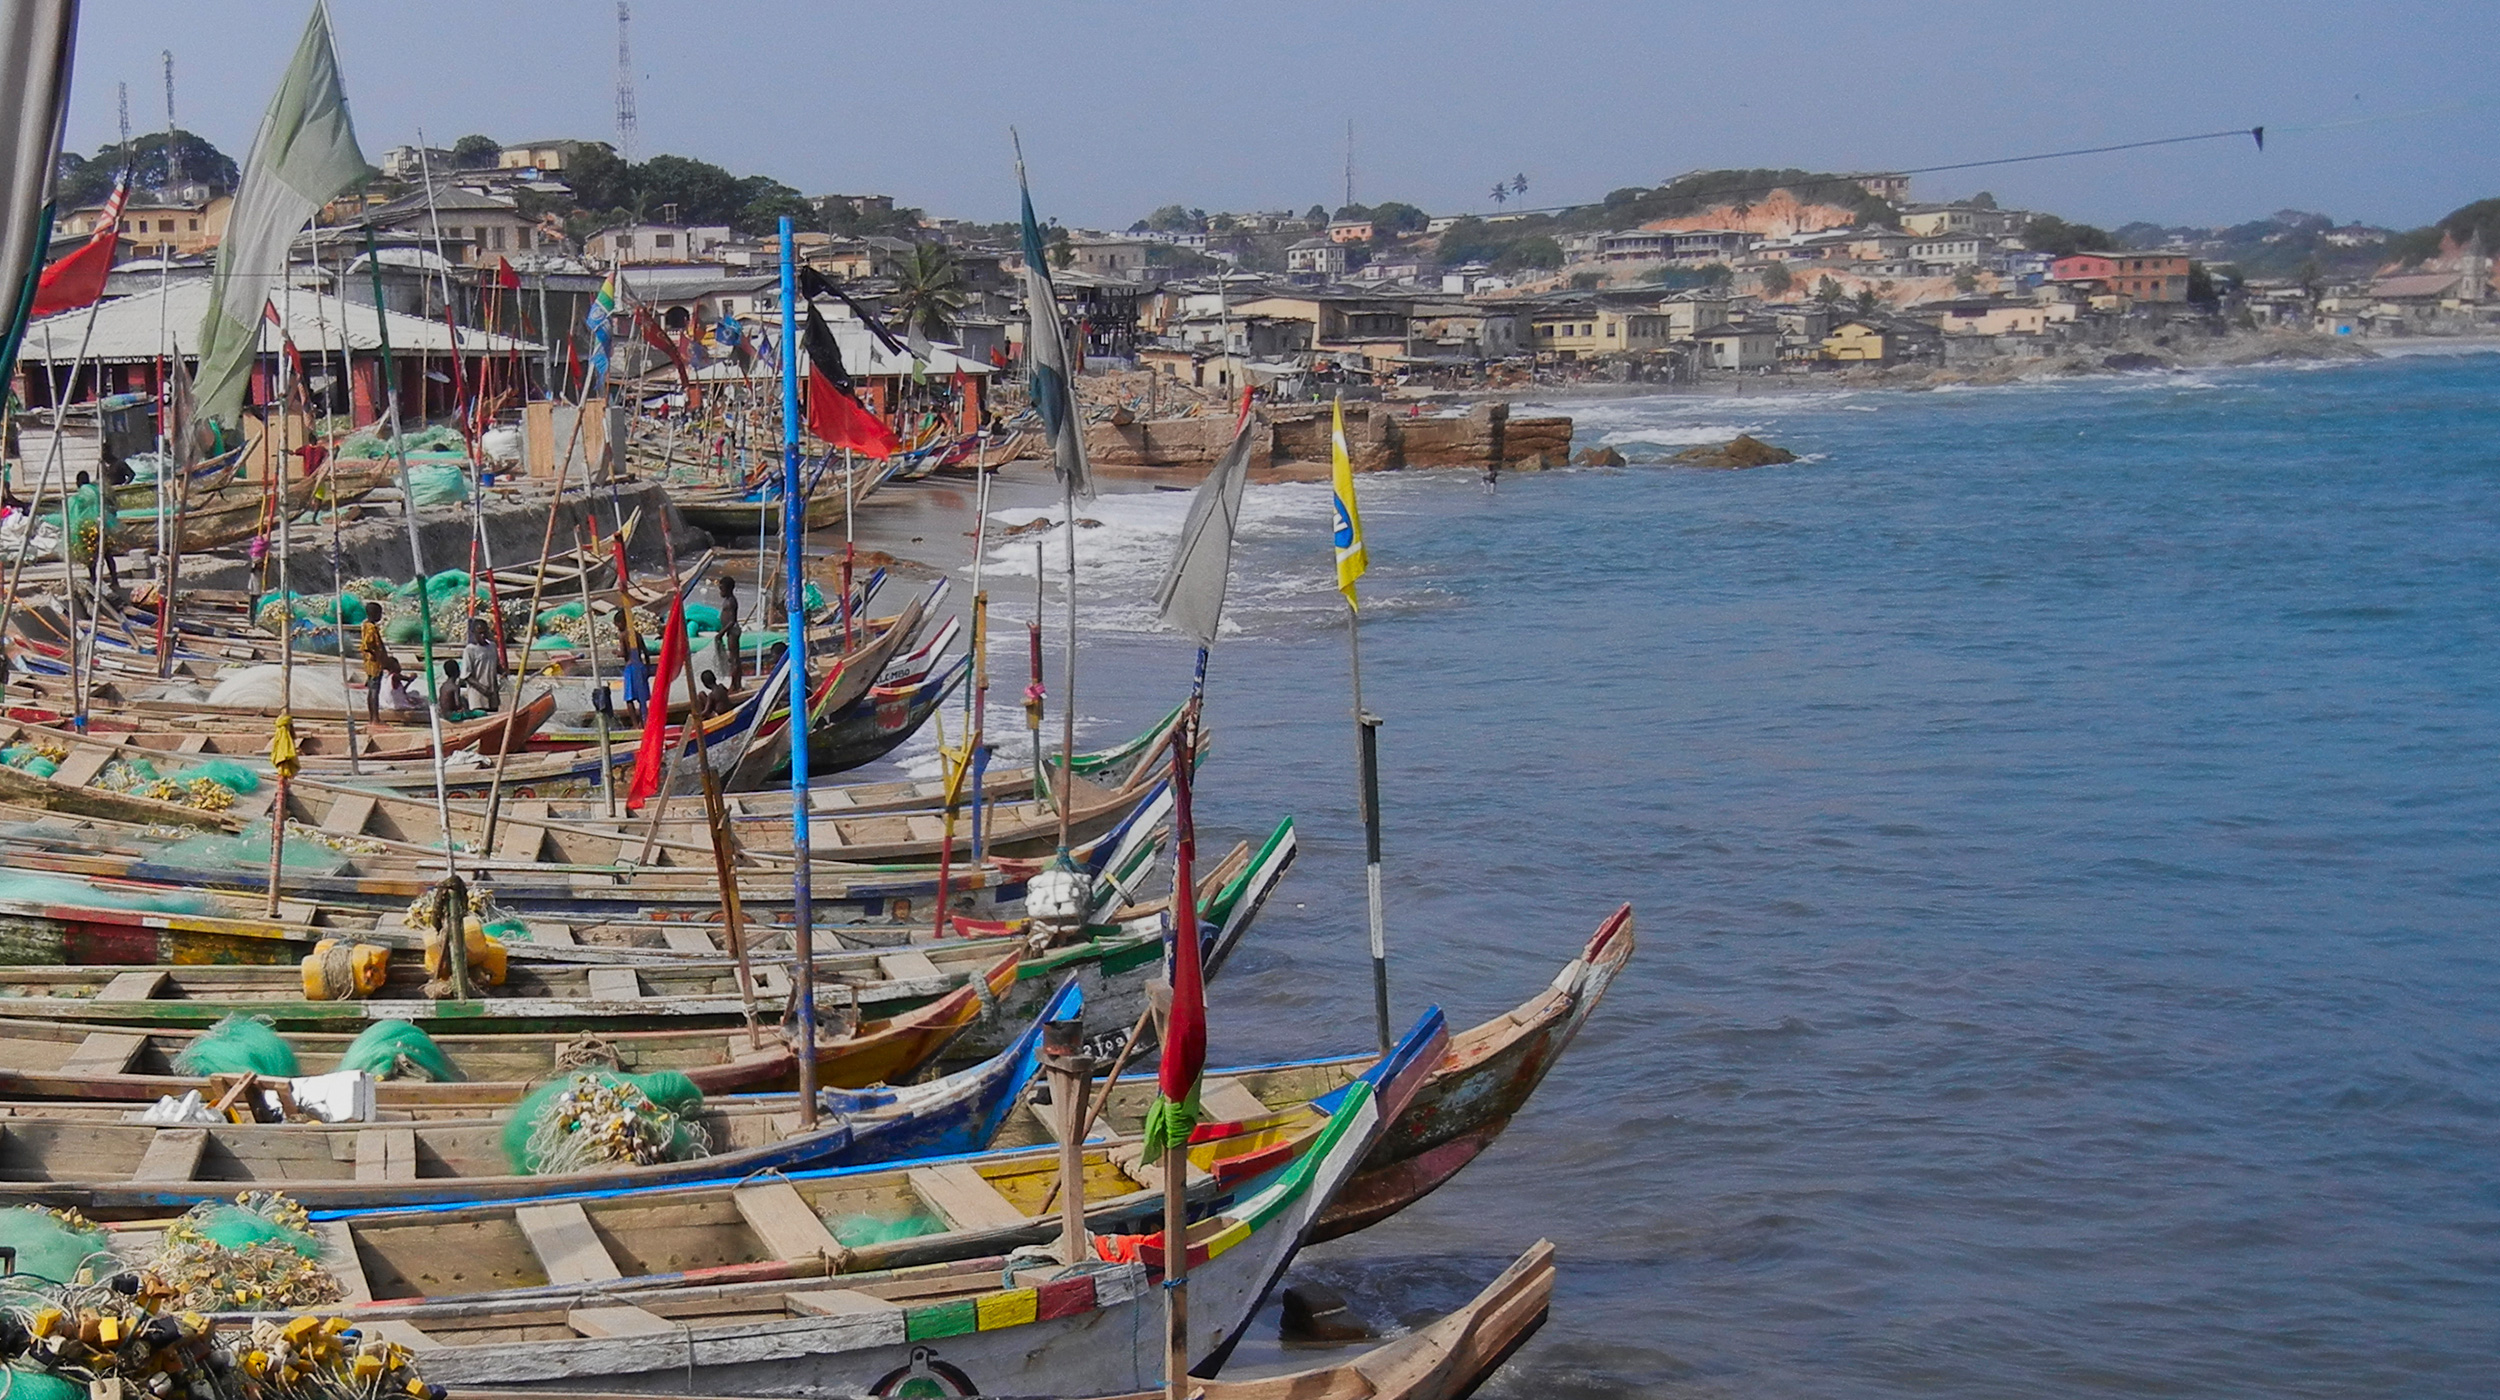 Fishing boats lined up in the harbor of Cape Coast in Ghana